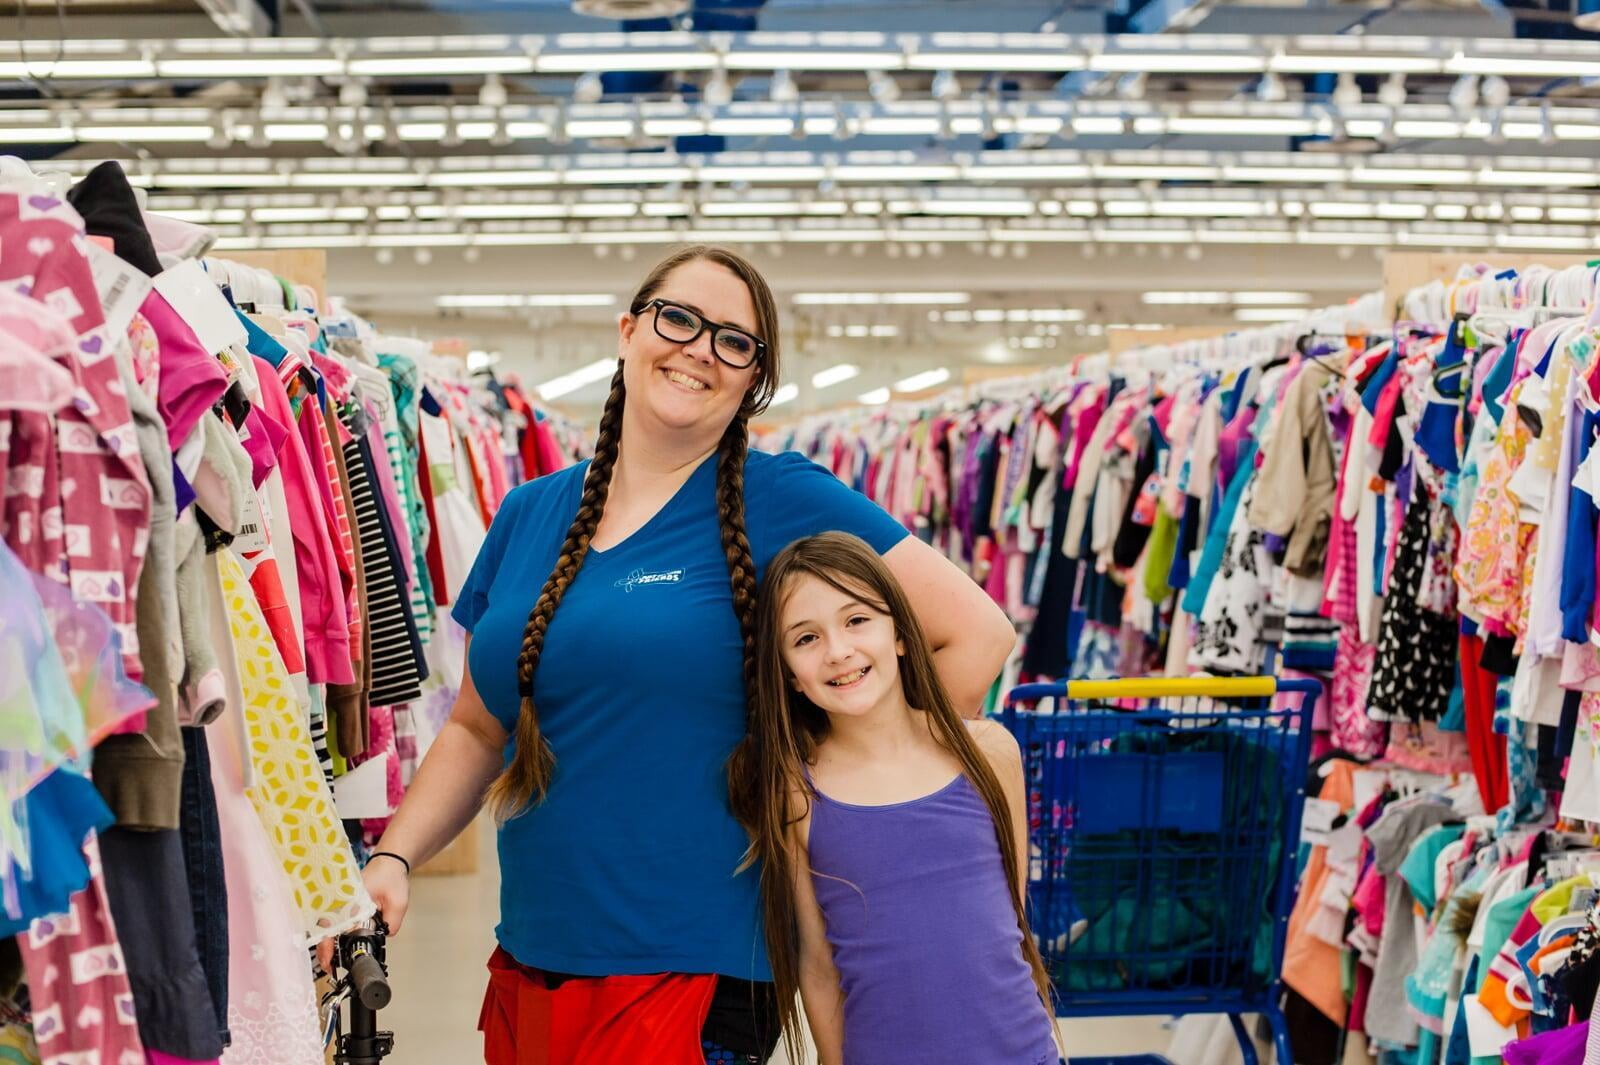 mom and daughter standing together in an aisle of clothes